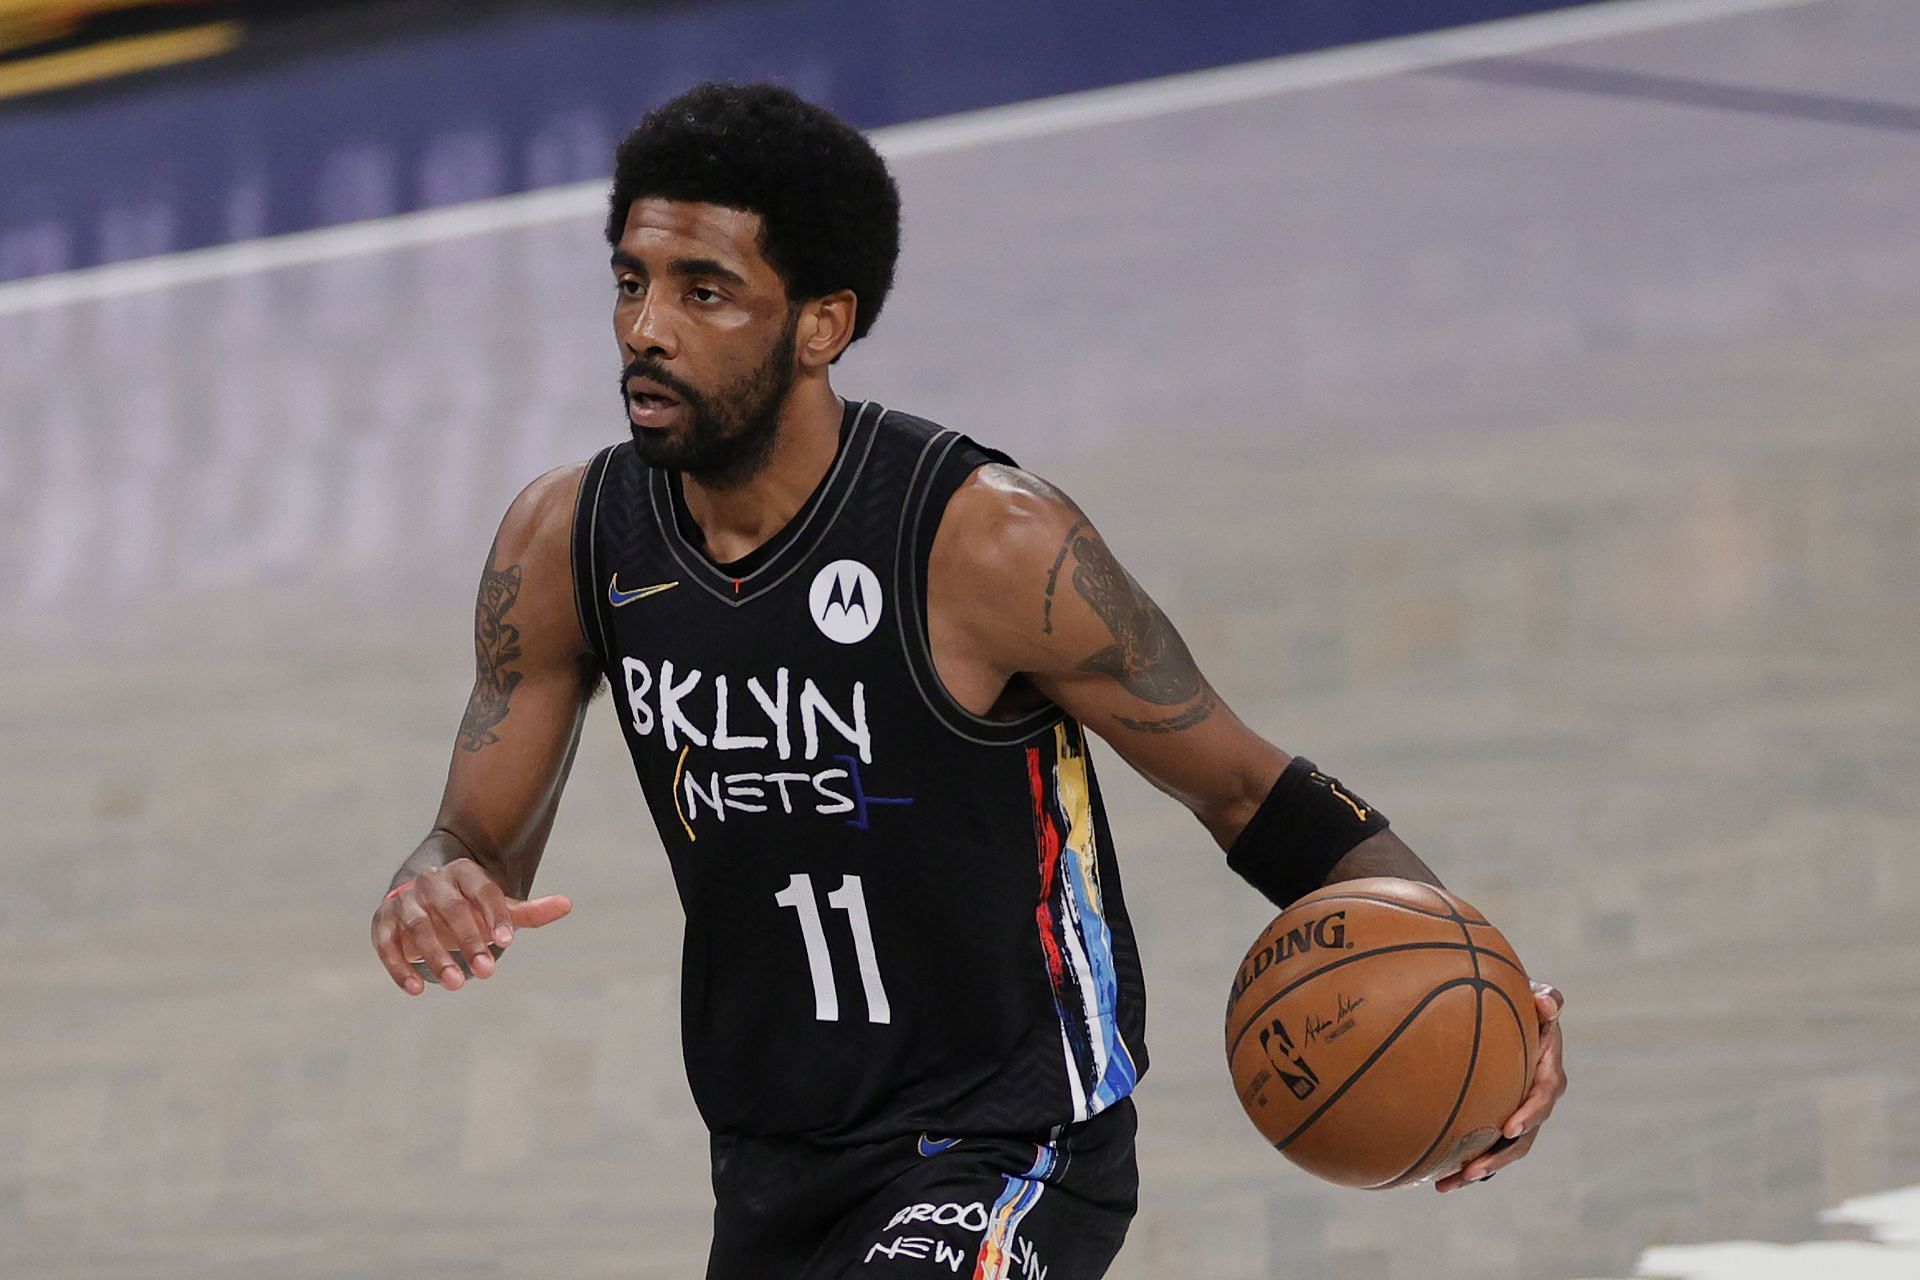 Kyrie Irving (#11) of the Brooklyn Nets is scheduled to make his season debut for the Brooklyn Nets.